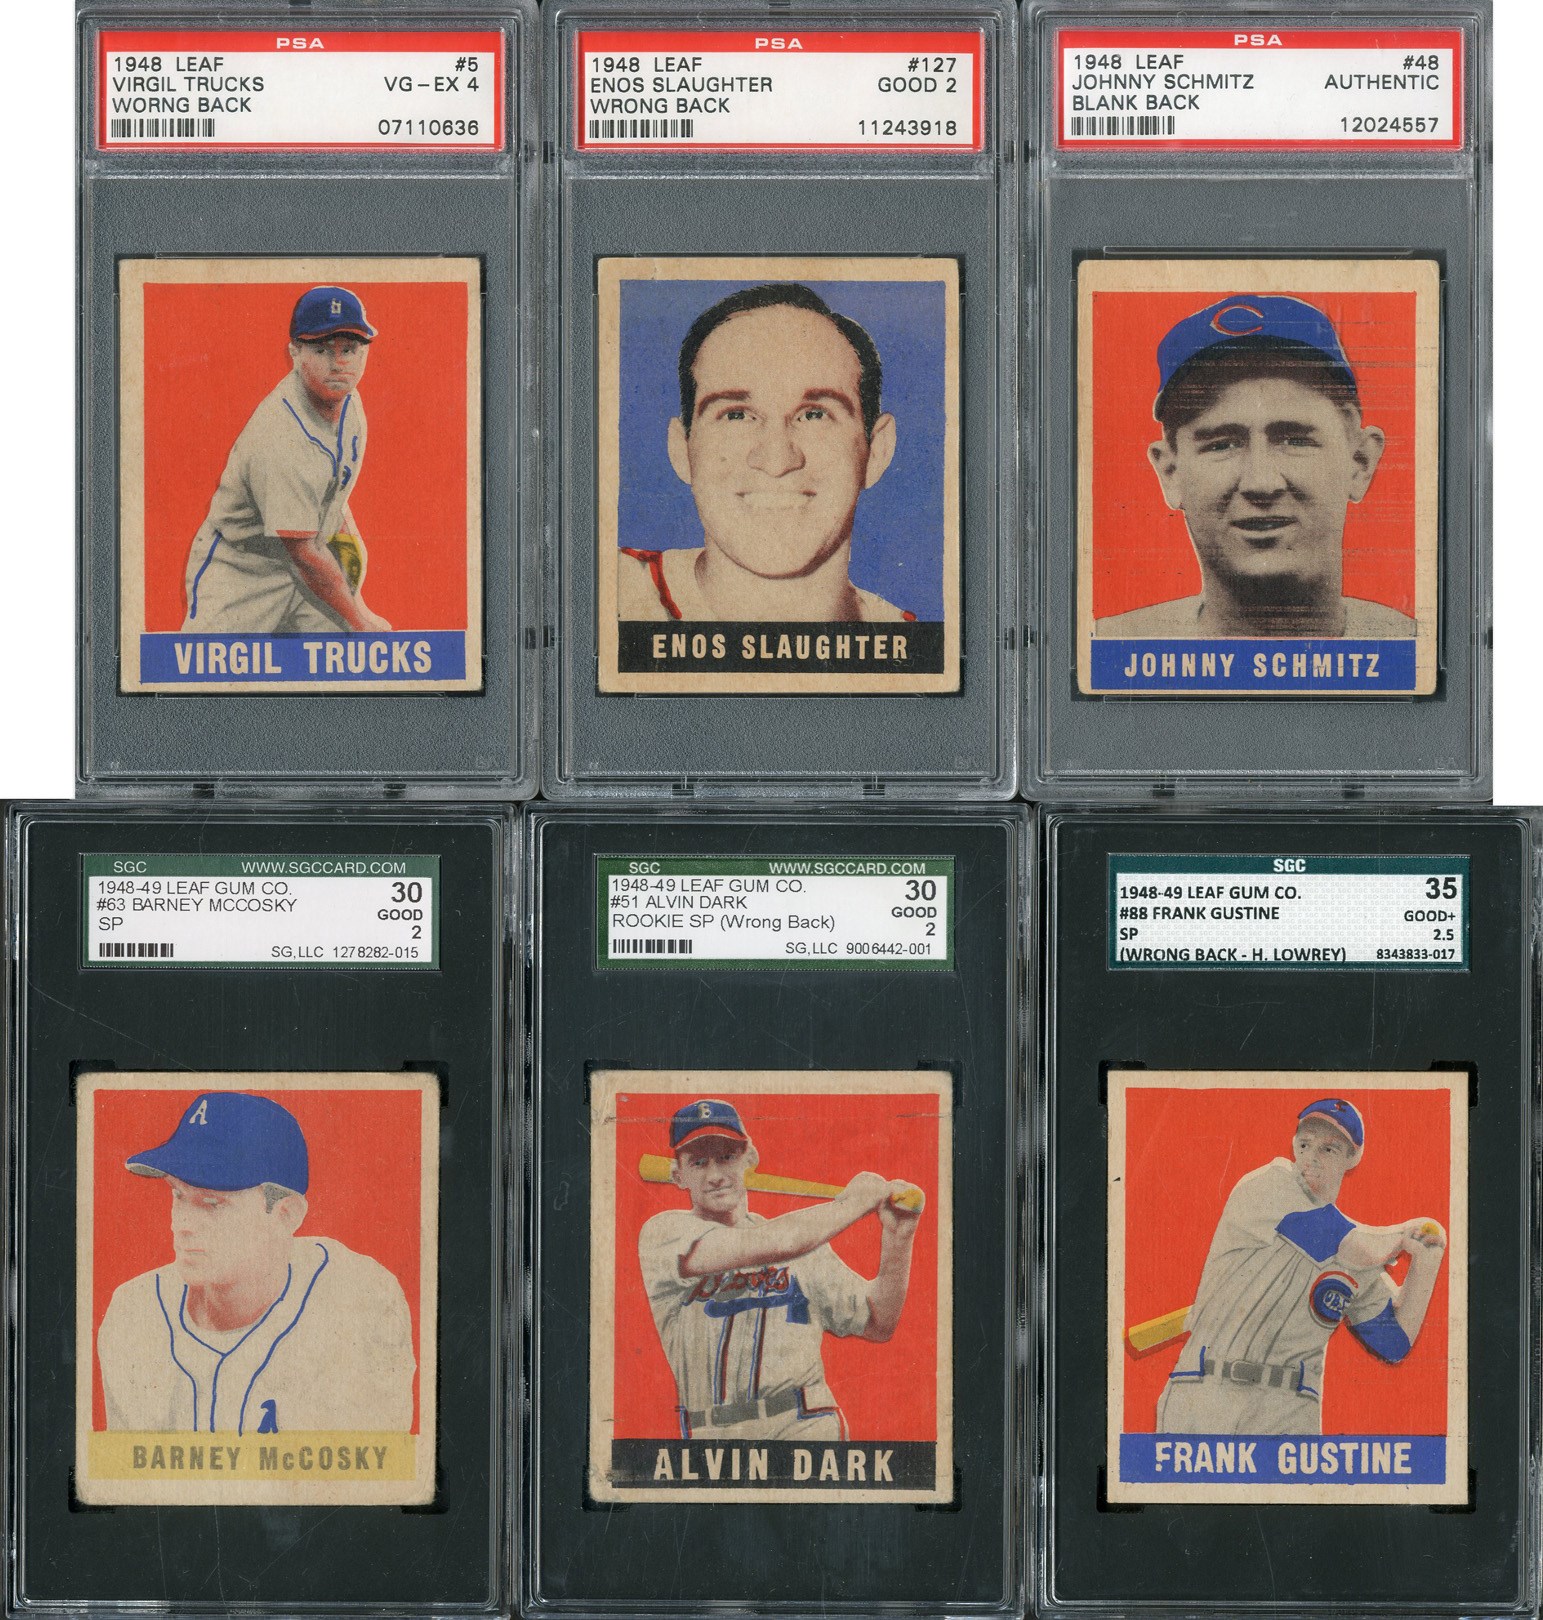 Baseball and Trading Cards - 1948 Leaf PSA and SGC Graded SP Collection of Wrong Backs and Blank Backs